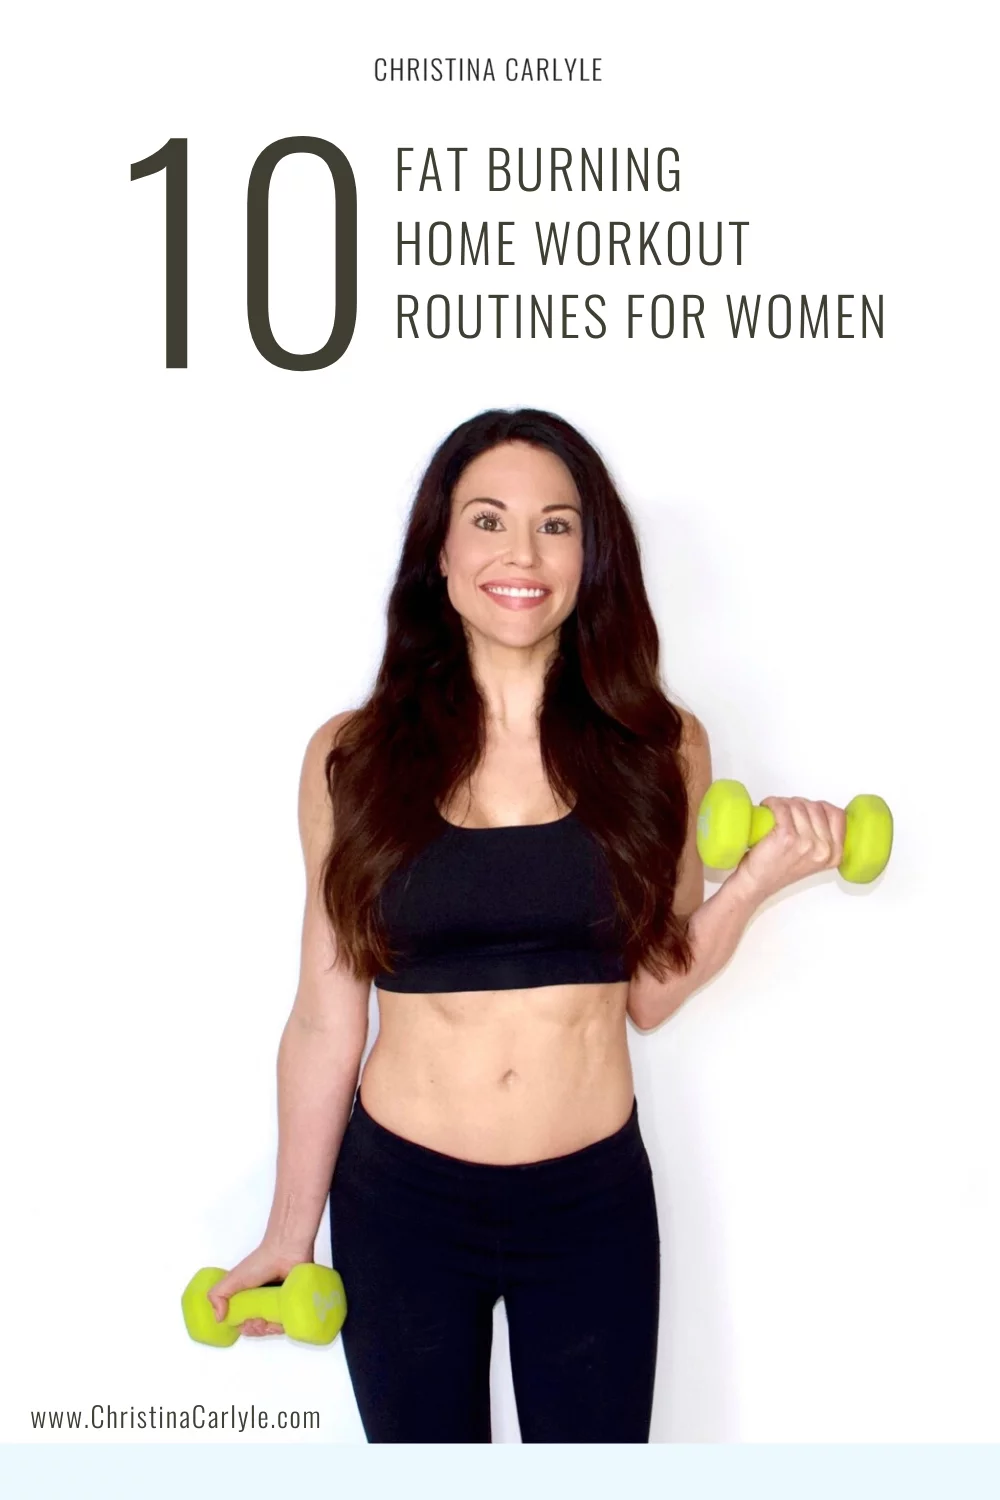 Christina Carlyle smiling holding dumbbells with text that says 10 fat burning home workouts for women